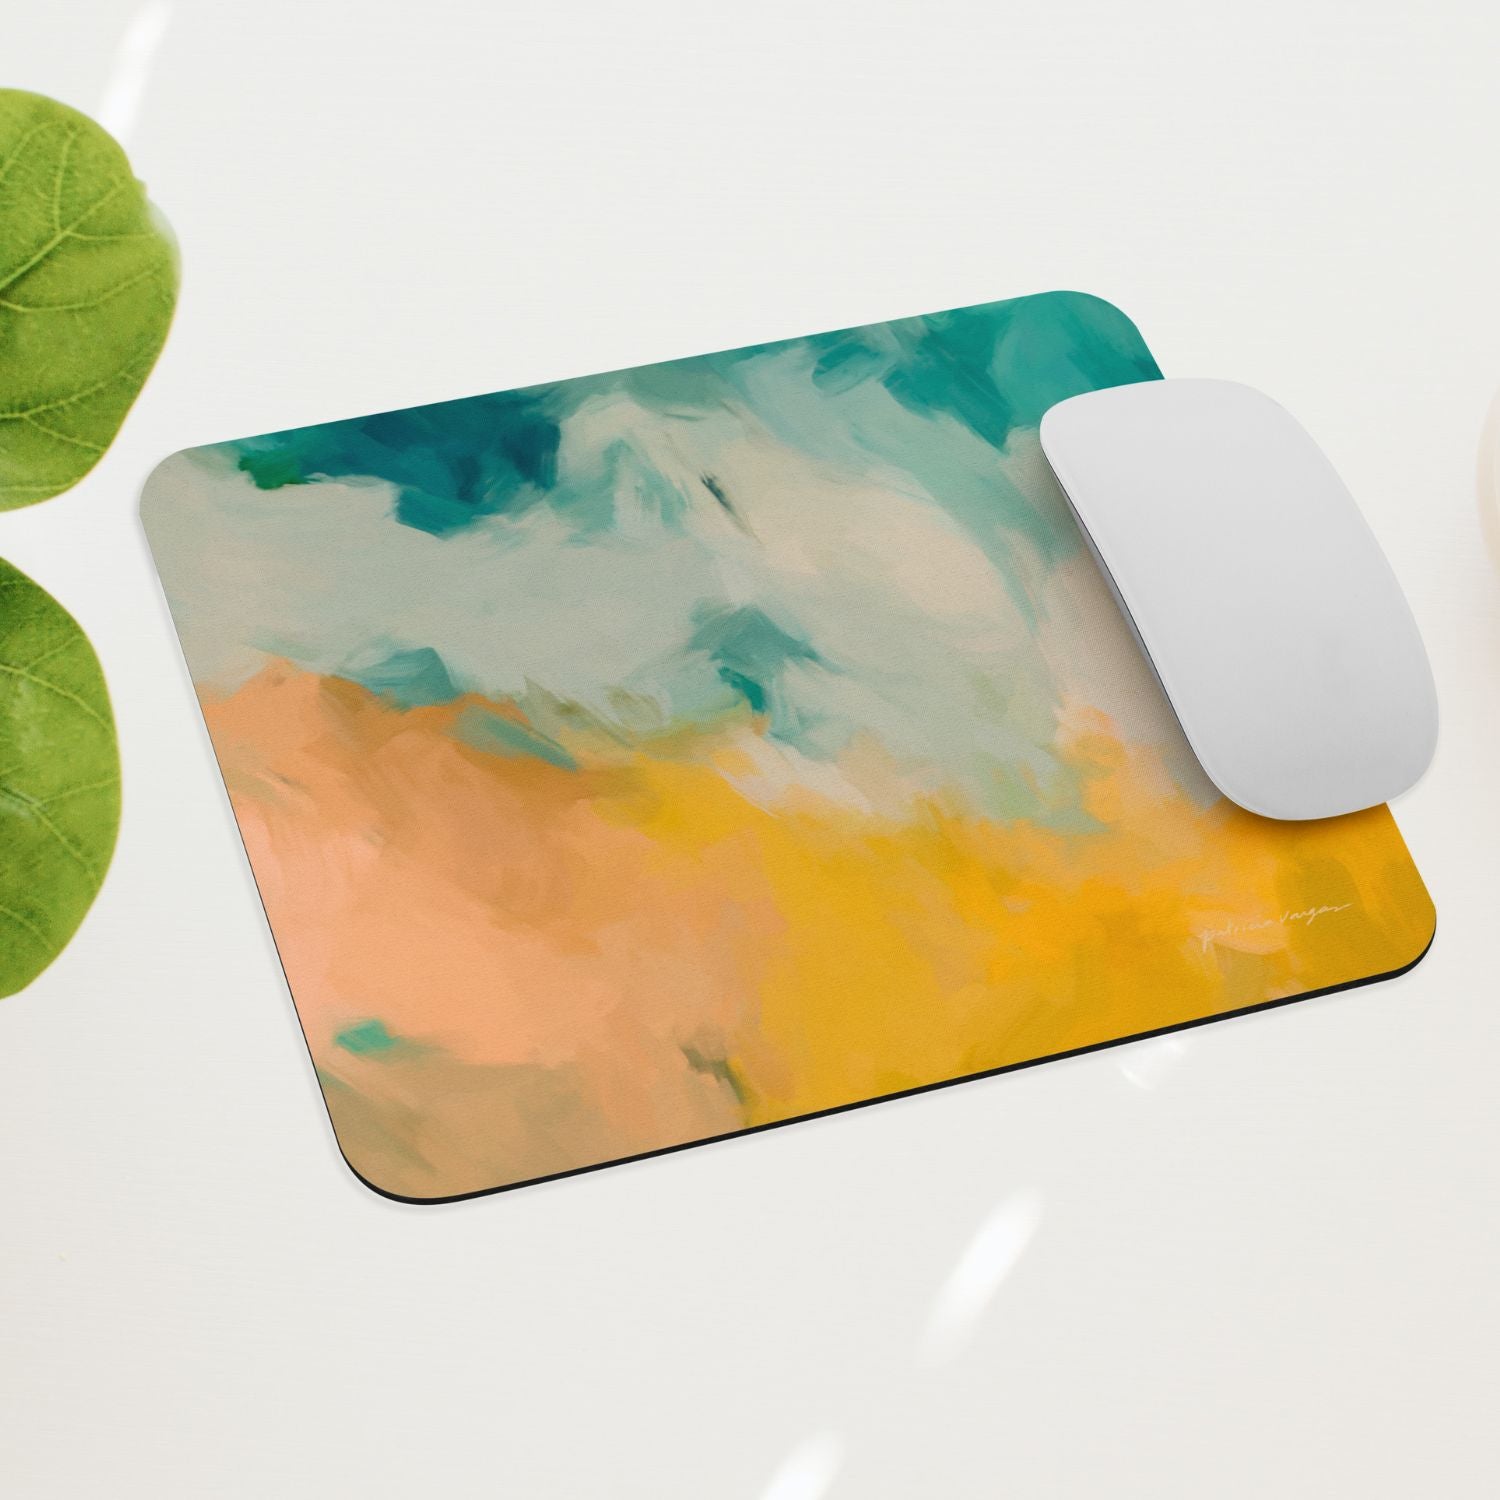 Beach Day, blue and yellow mouse pad for styling your office desk. Featuring artwork by Parima Studio. Home office styling accessories, cubicle styling accessories.